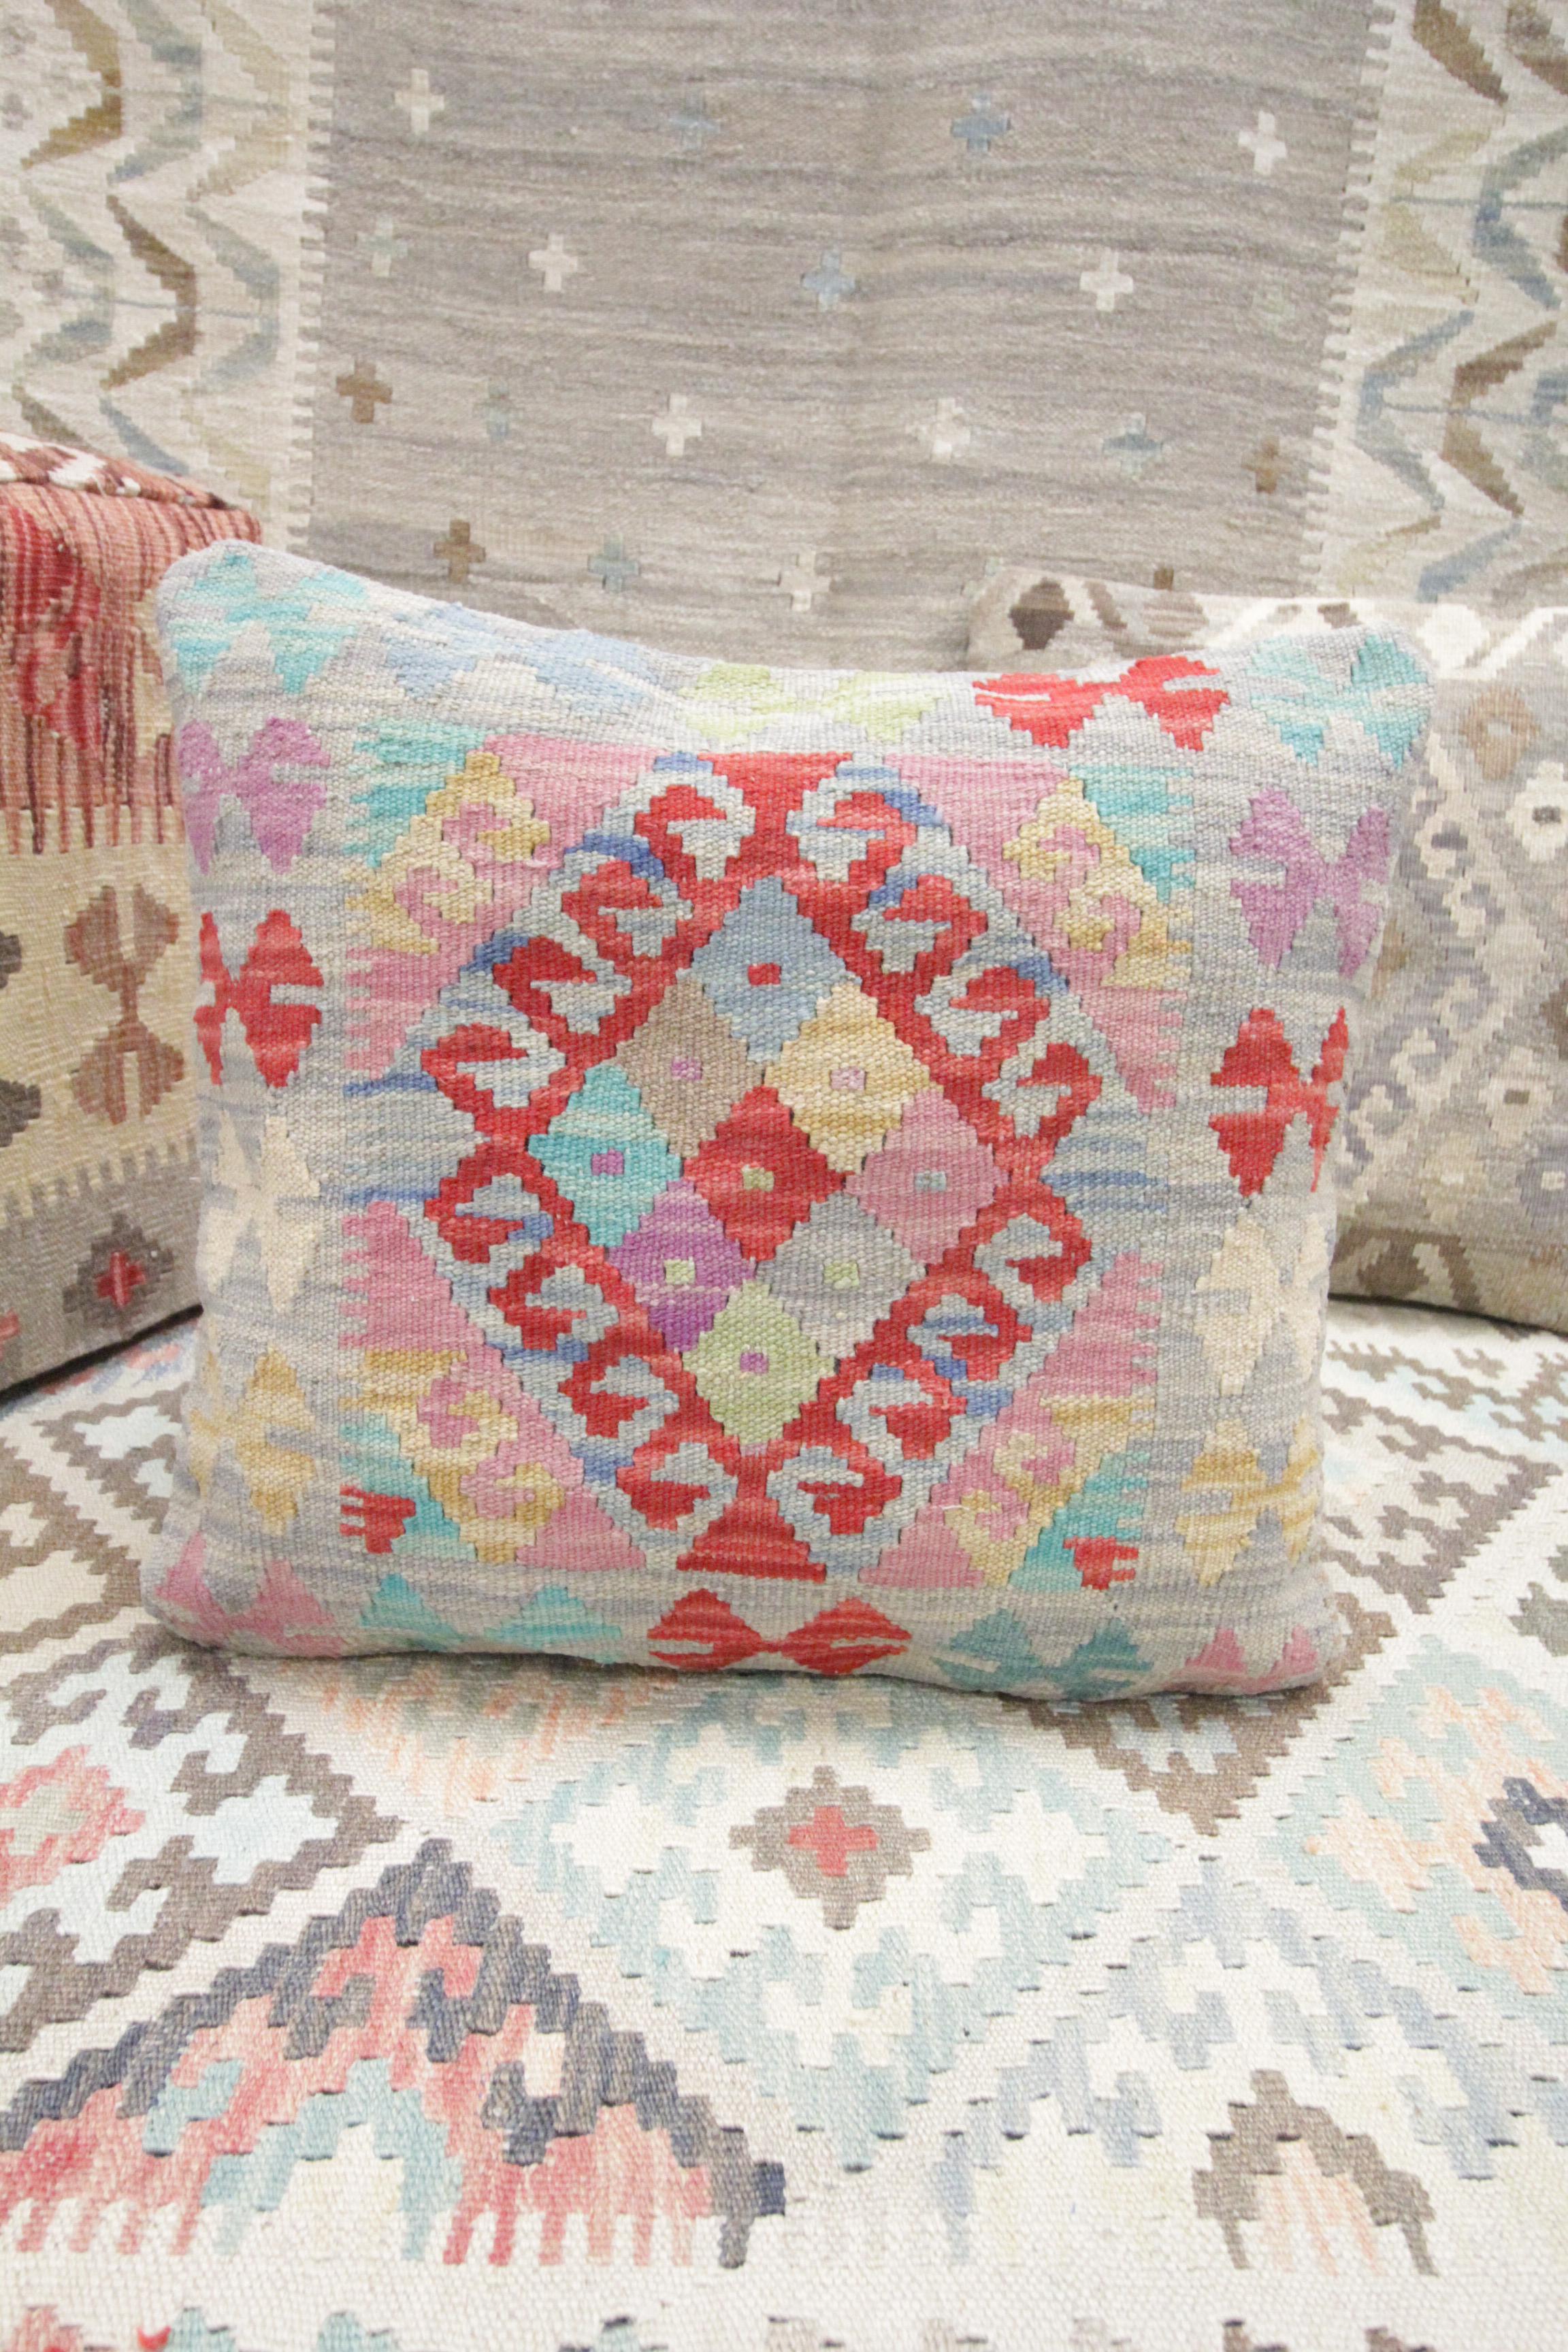 This new traditional Kilim cushion cover is a handwoven piece constructed in the early 21st century. The design has been delicately woven by hand and features a symmetrical geometric pattern that is sure to Stand out on any sofa or armchair! This